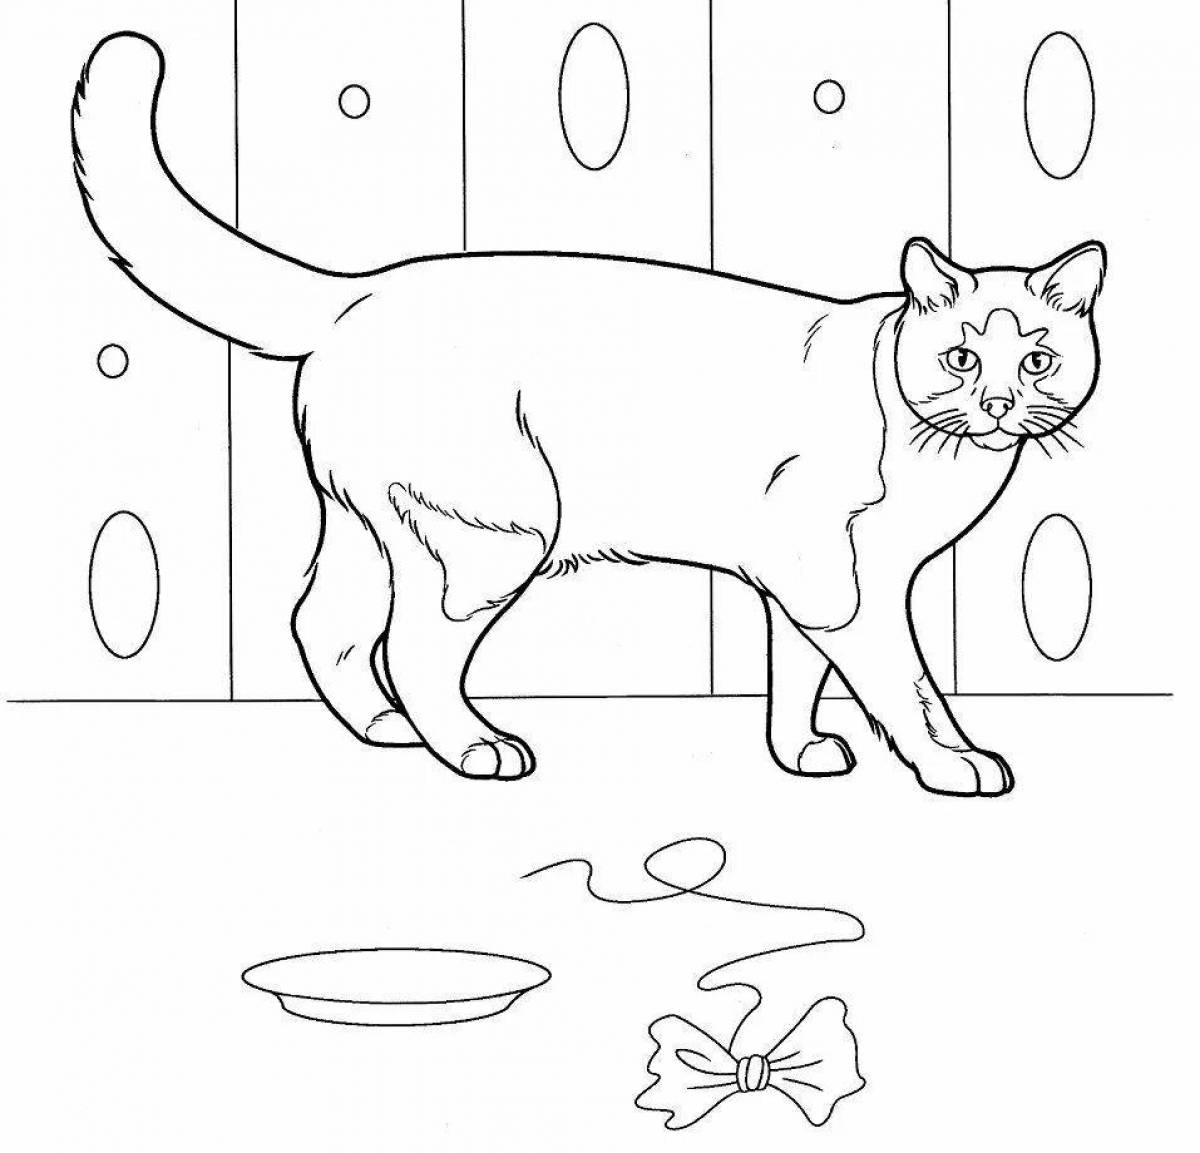 Vaska's awesome cat coloring book